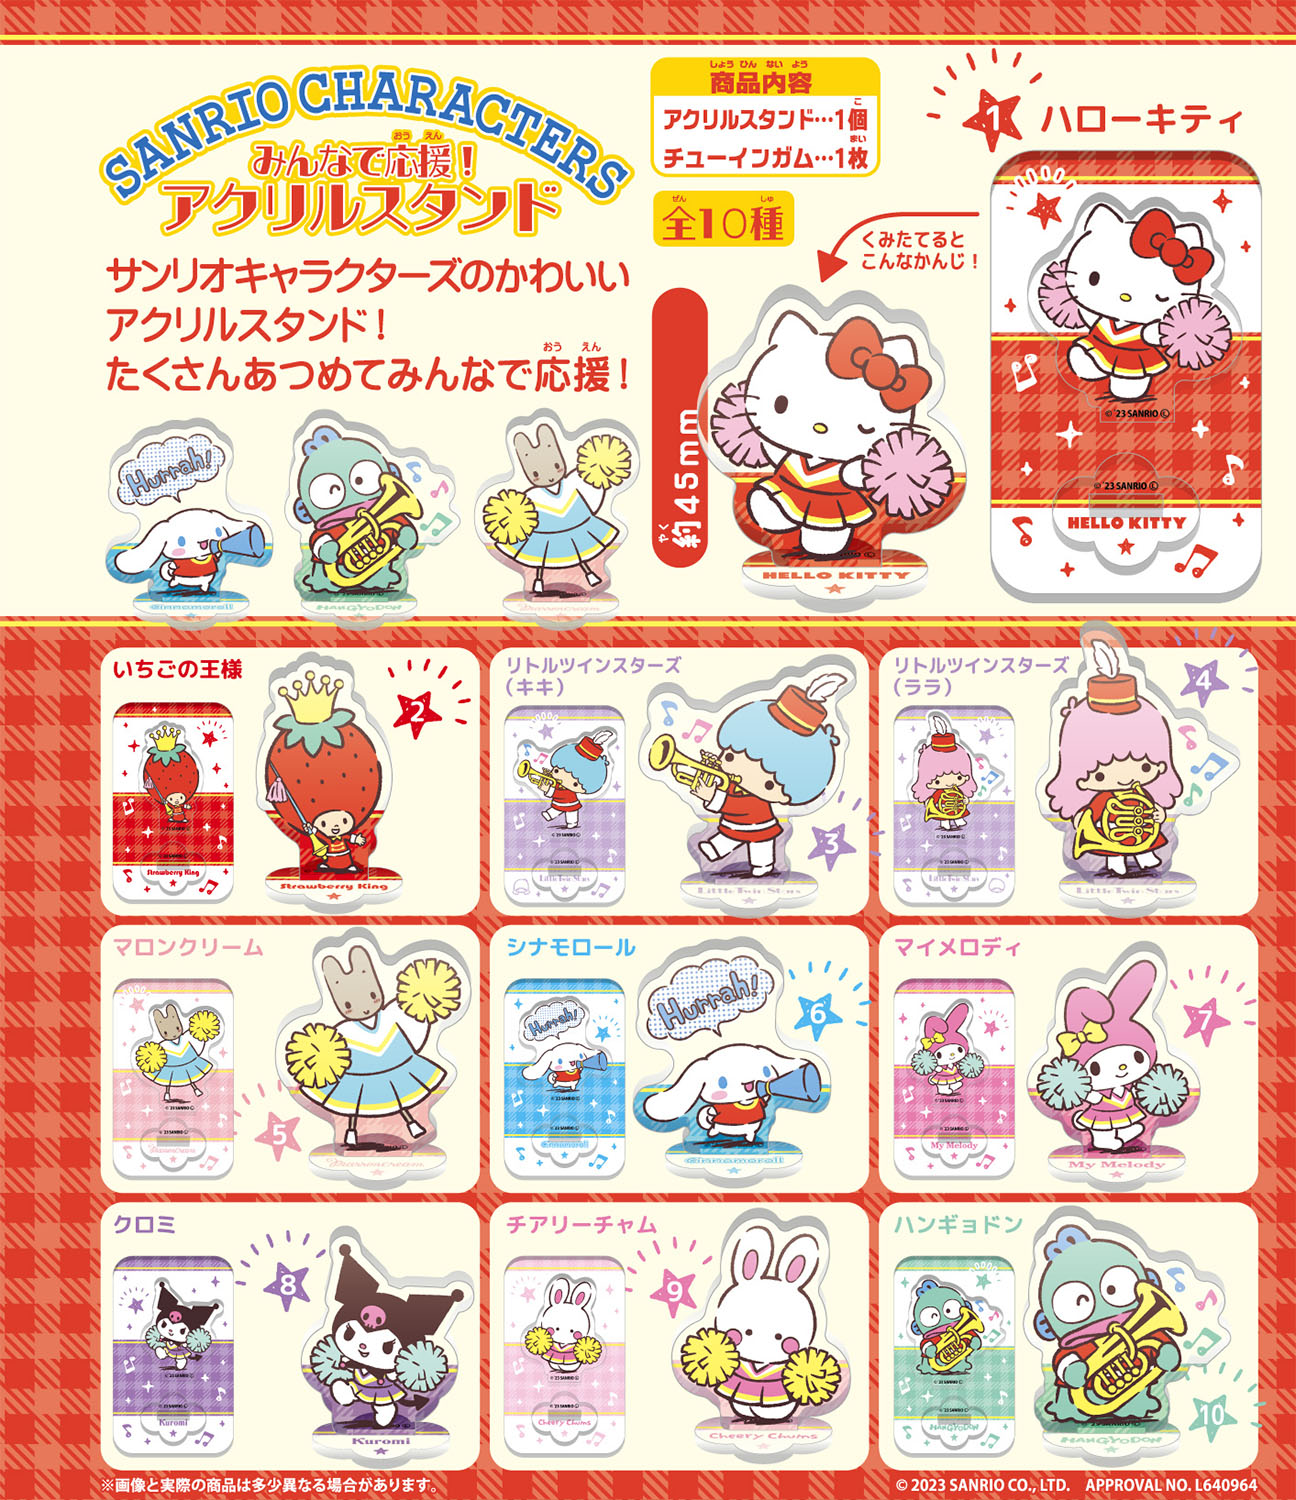 HELLO KITTY® AND FRIENDS 3-4 PIXEL PATCH SERIES *BLIND BOX* – Gacha Mart